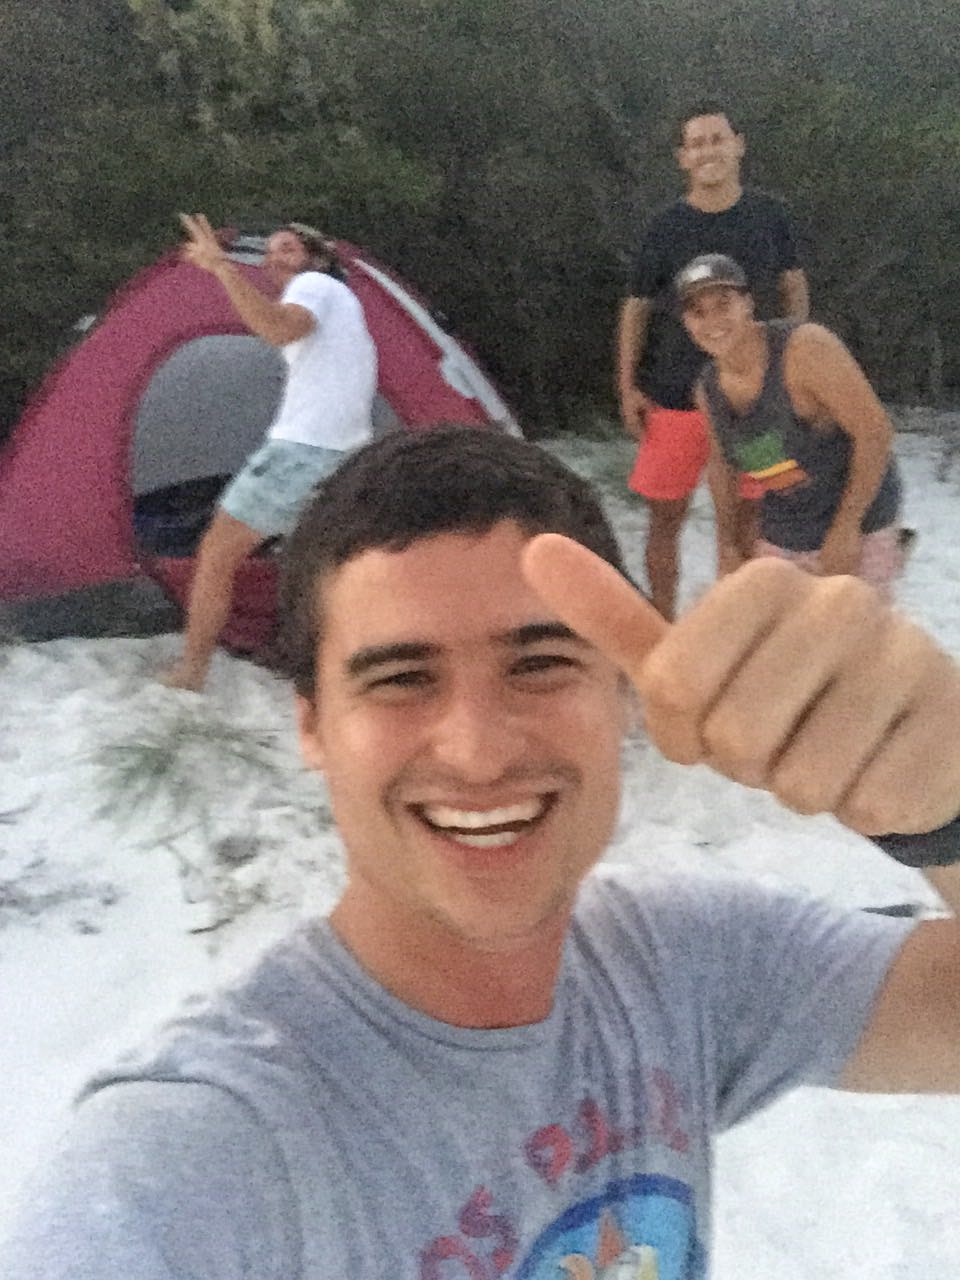 Pabs and his Argentinean friends camping in Jervis Bay